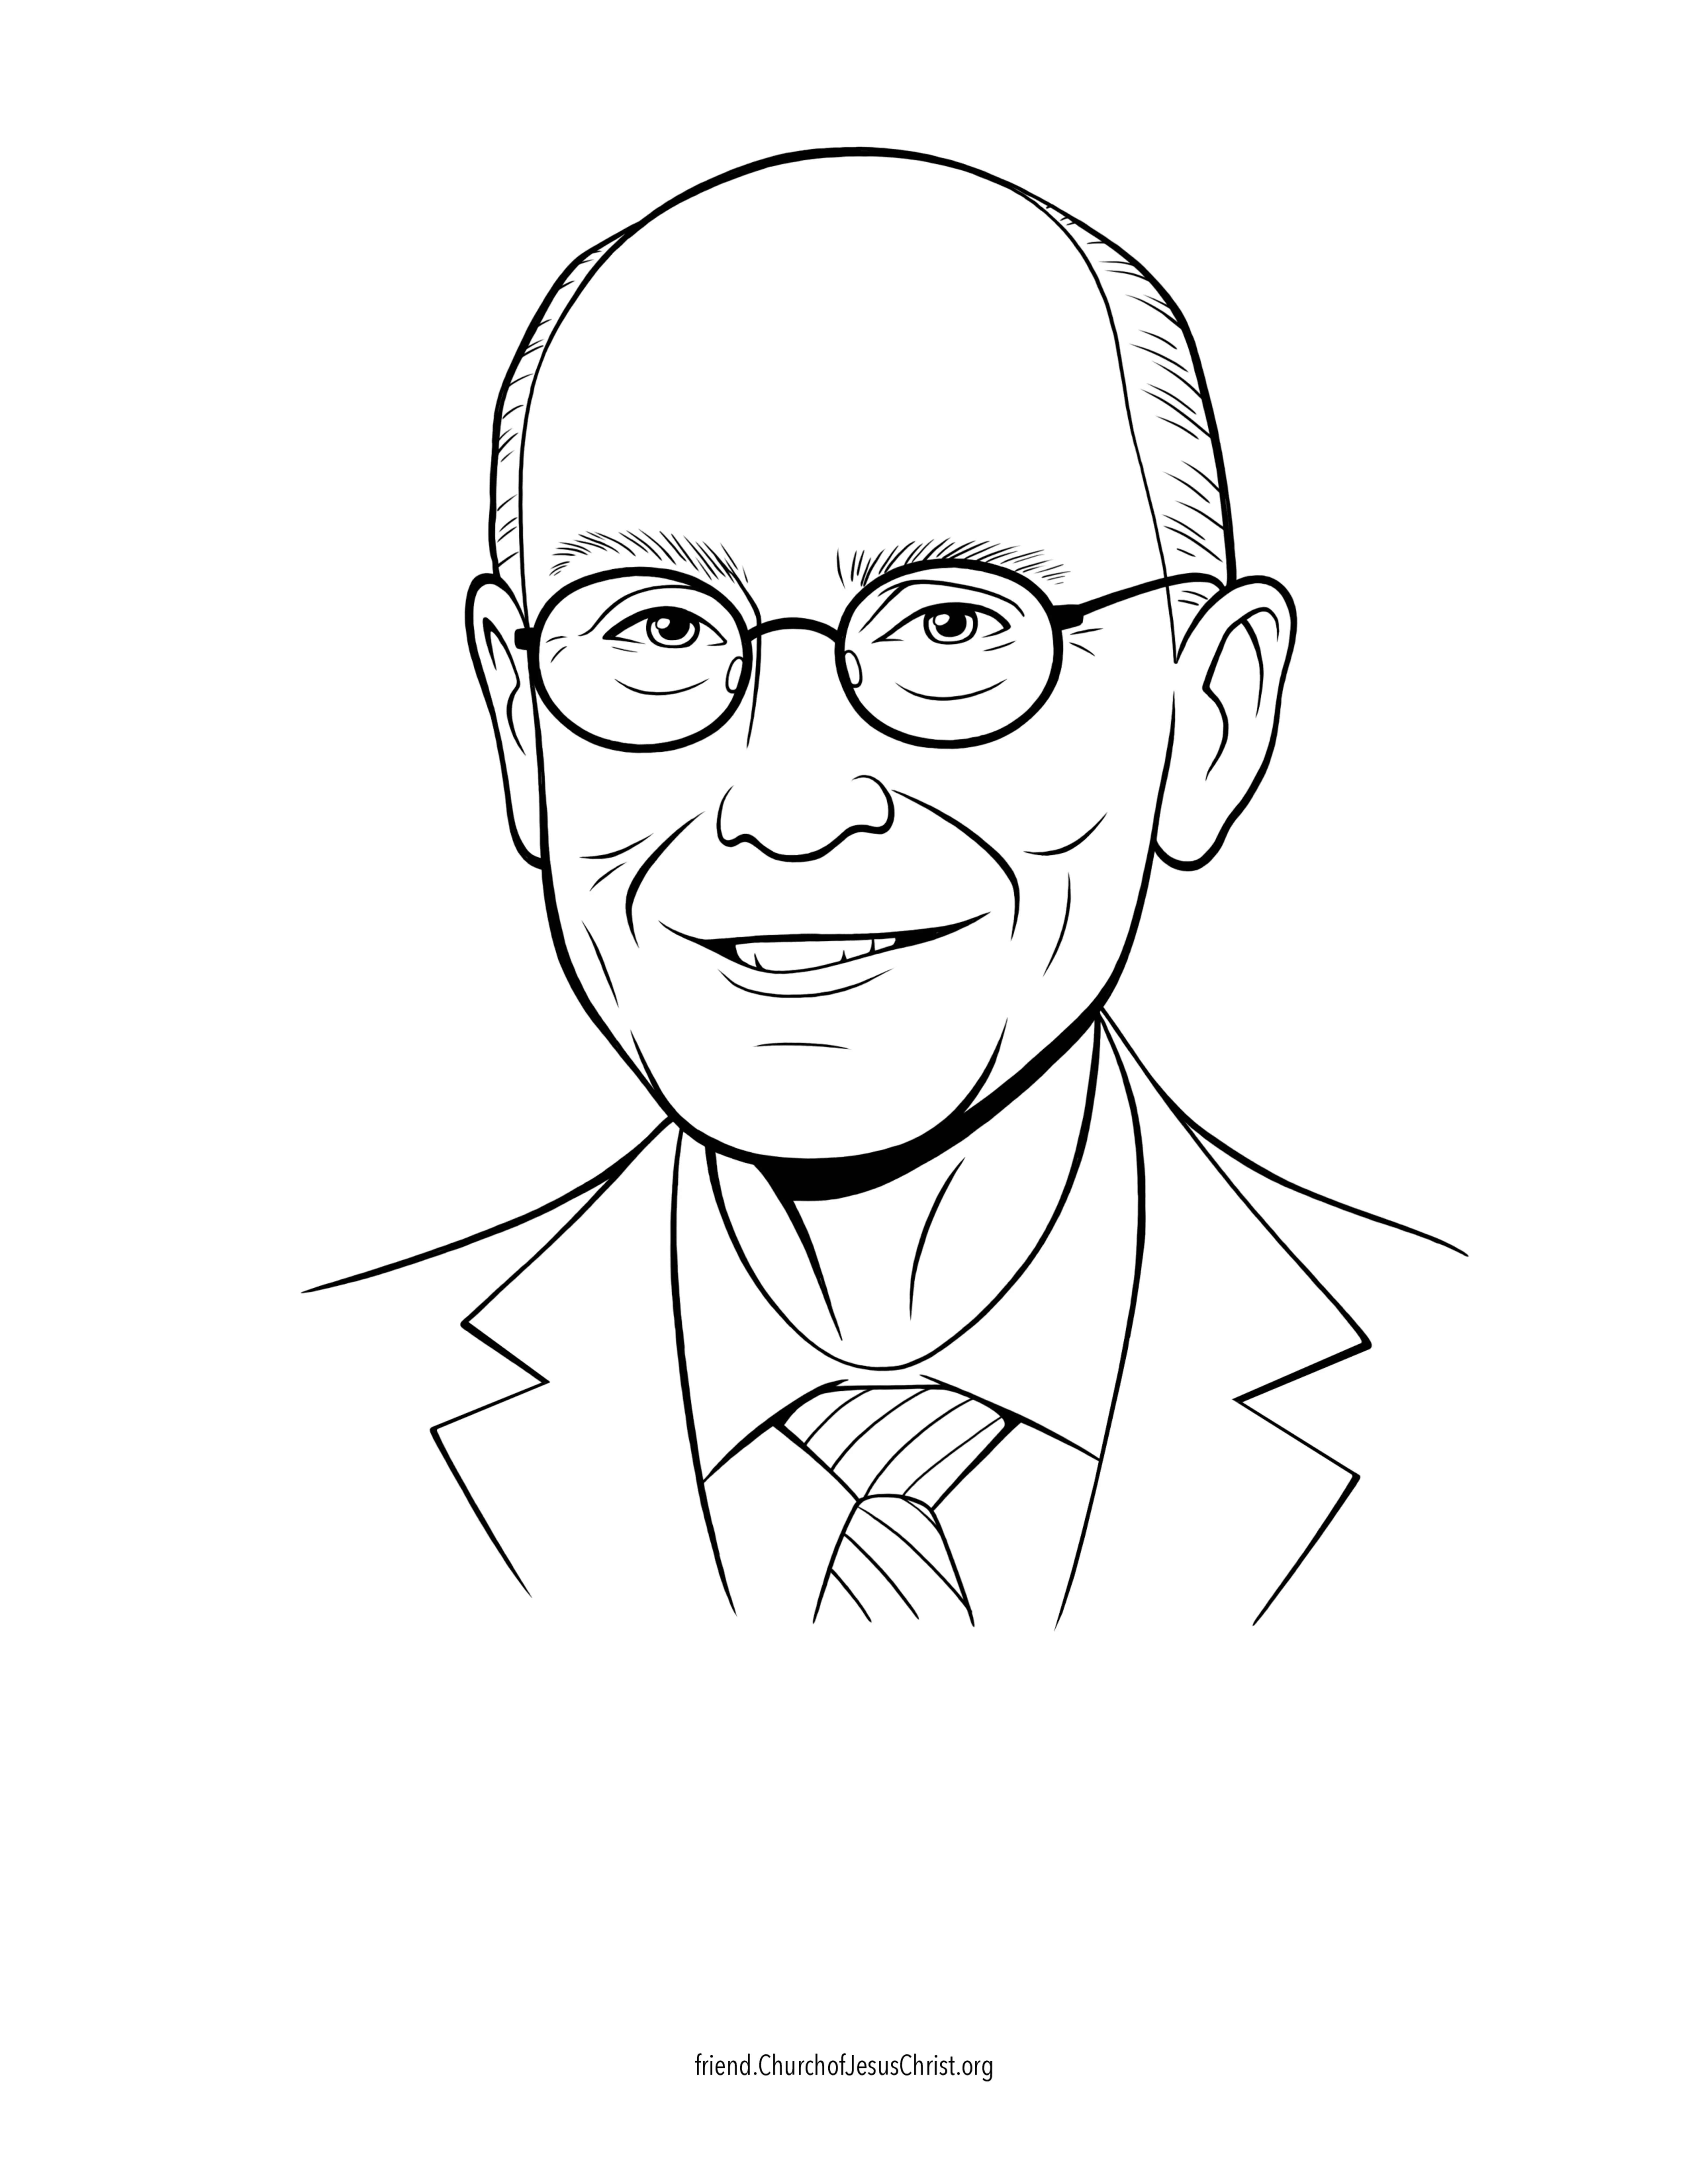 A coloring page of the official portrait of Henry B. Eyring.